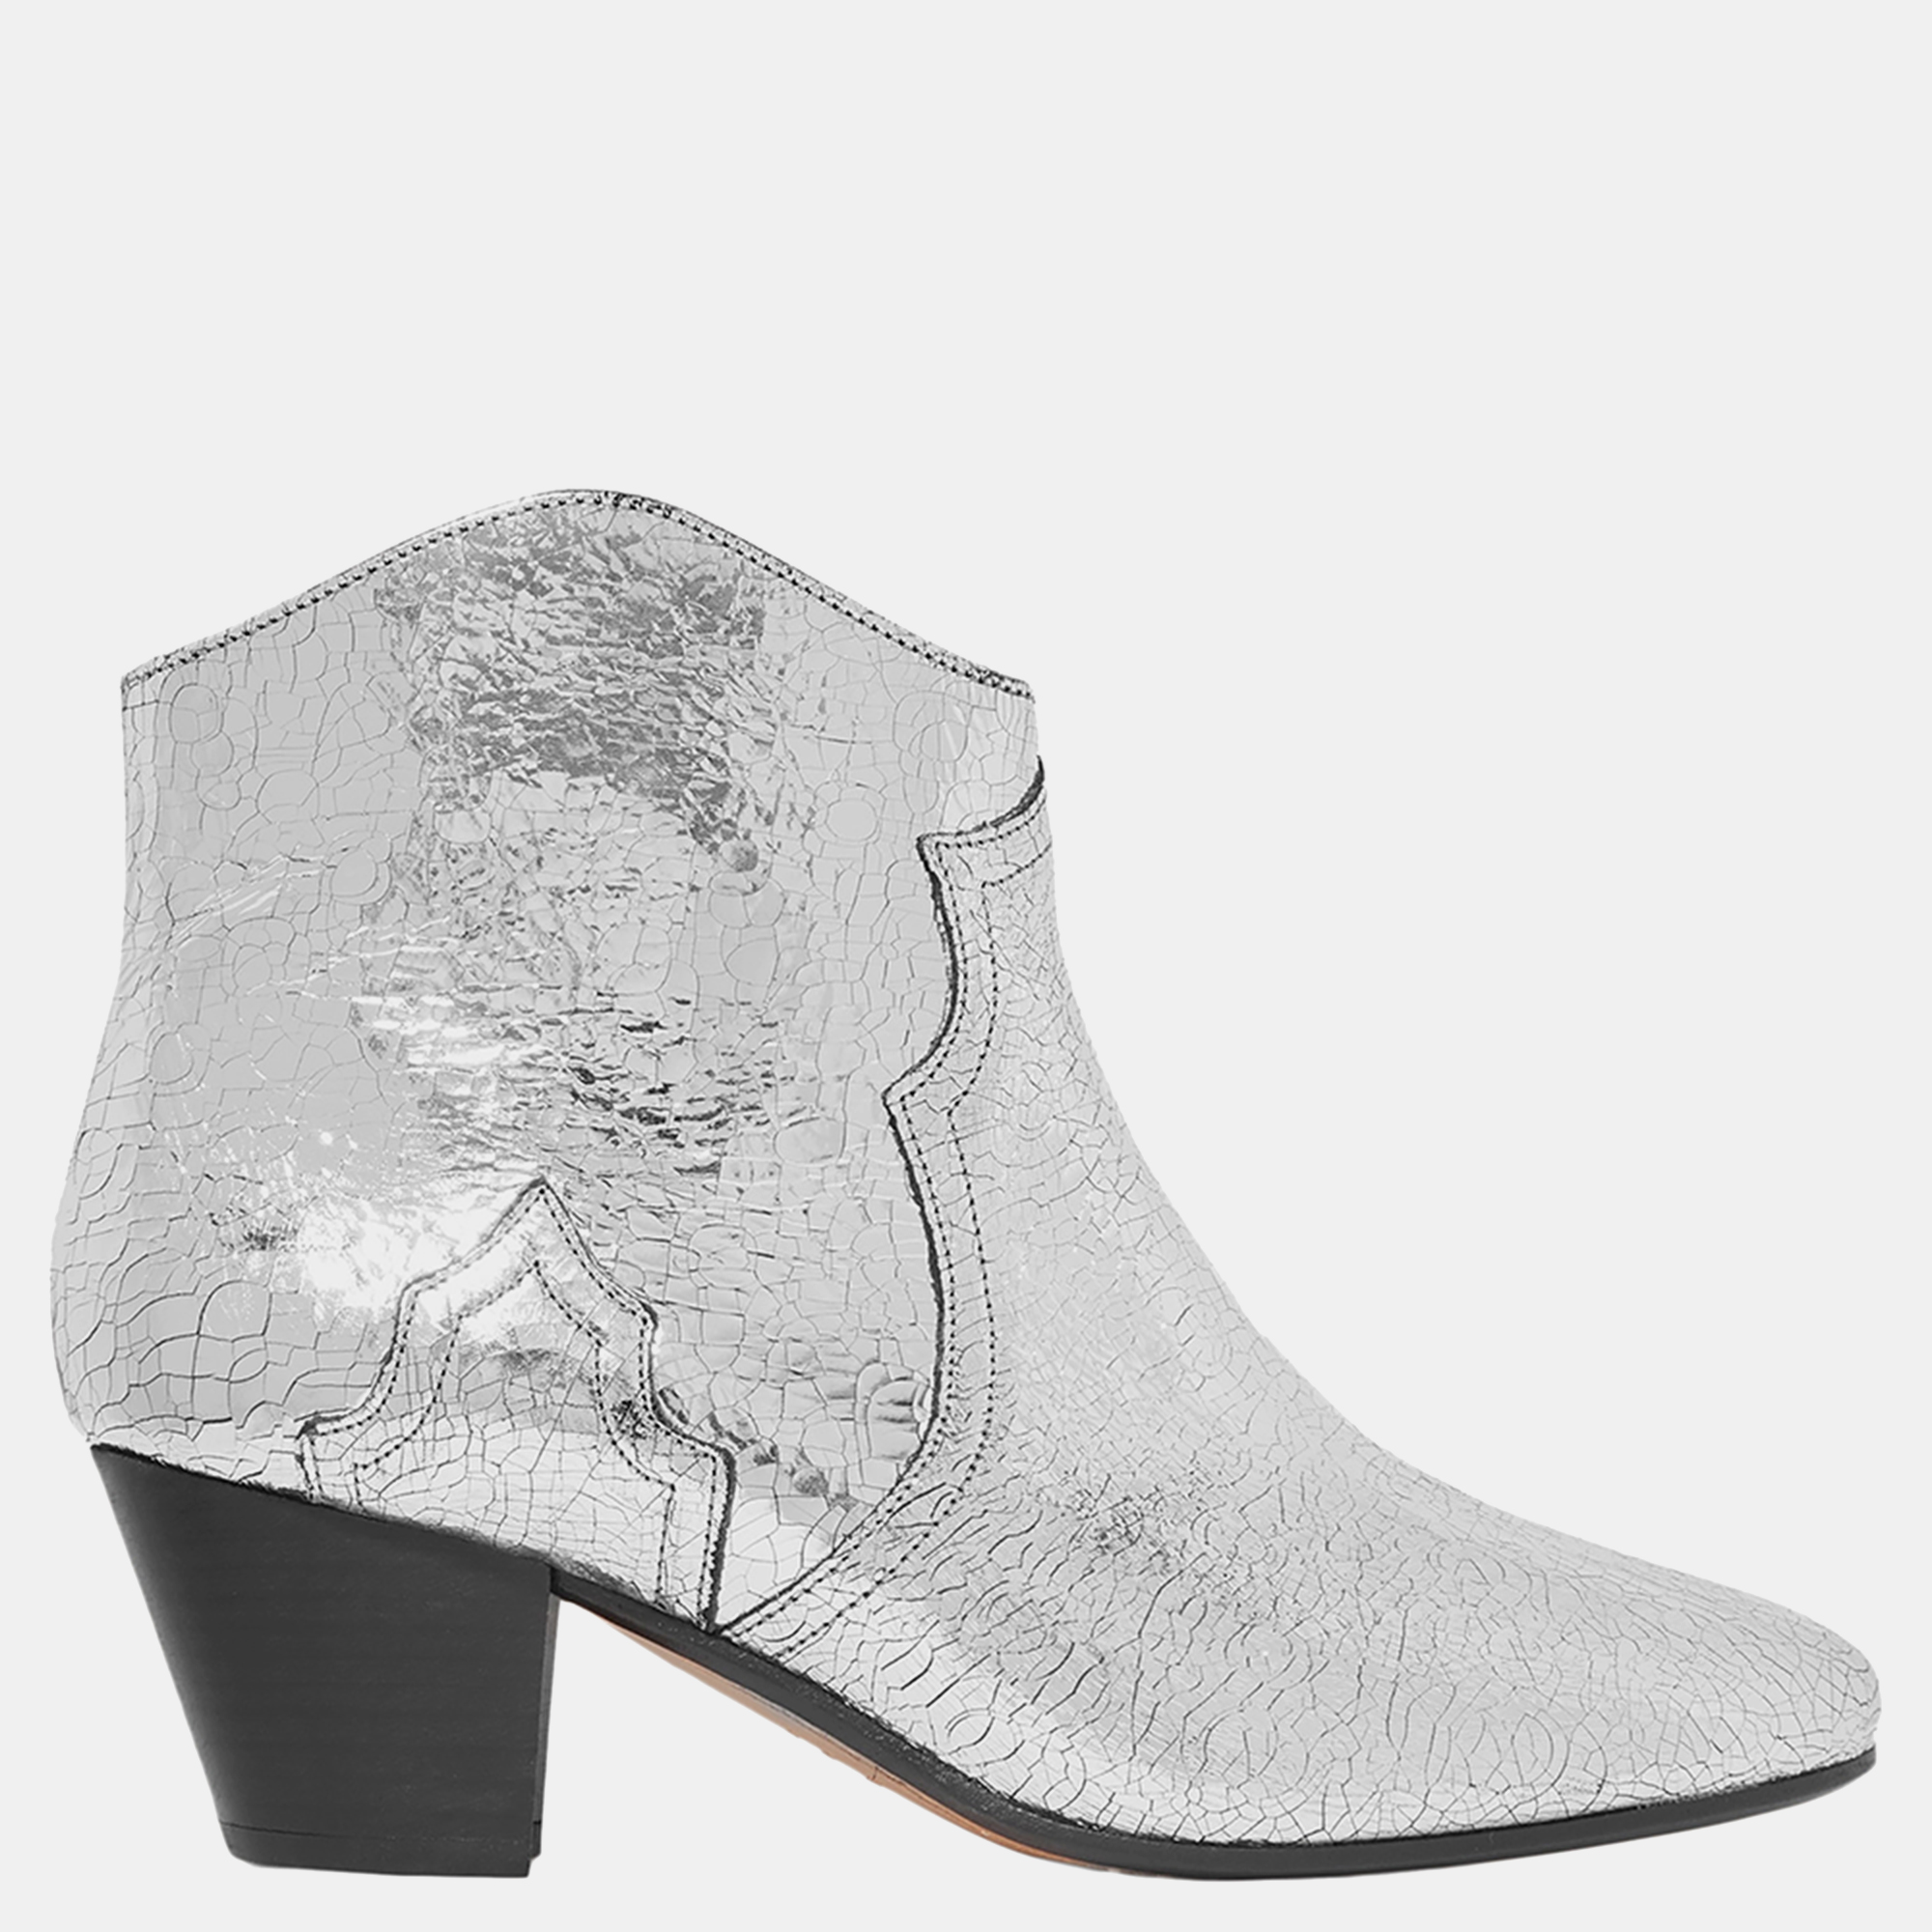 Isabel marant crackle leather ankle boots 37